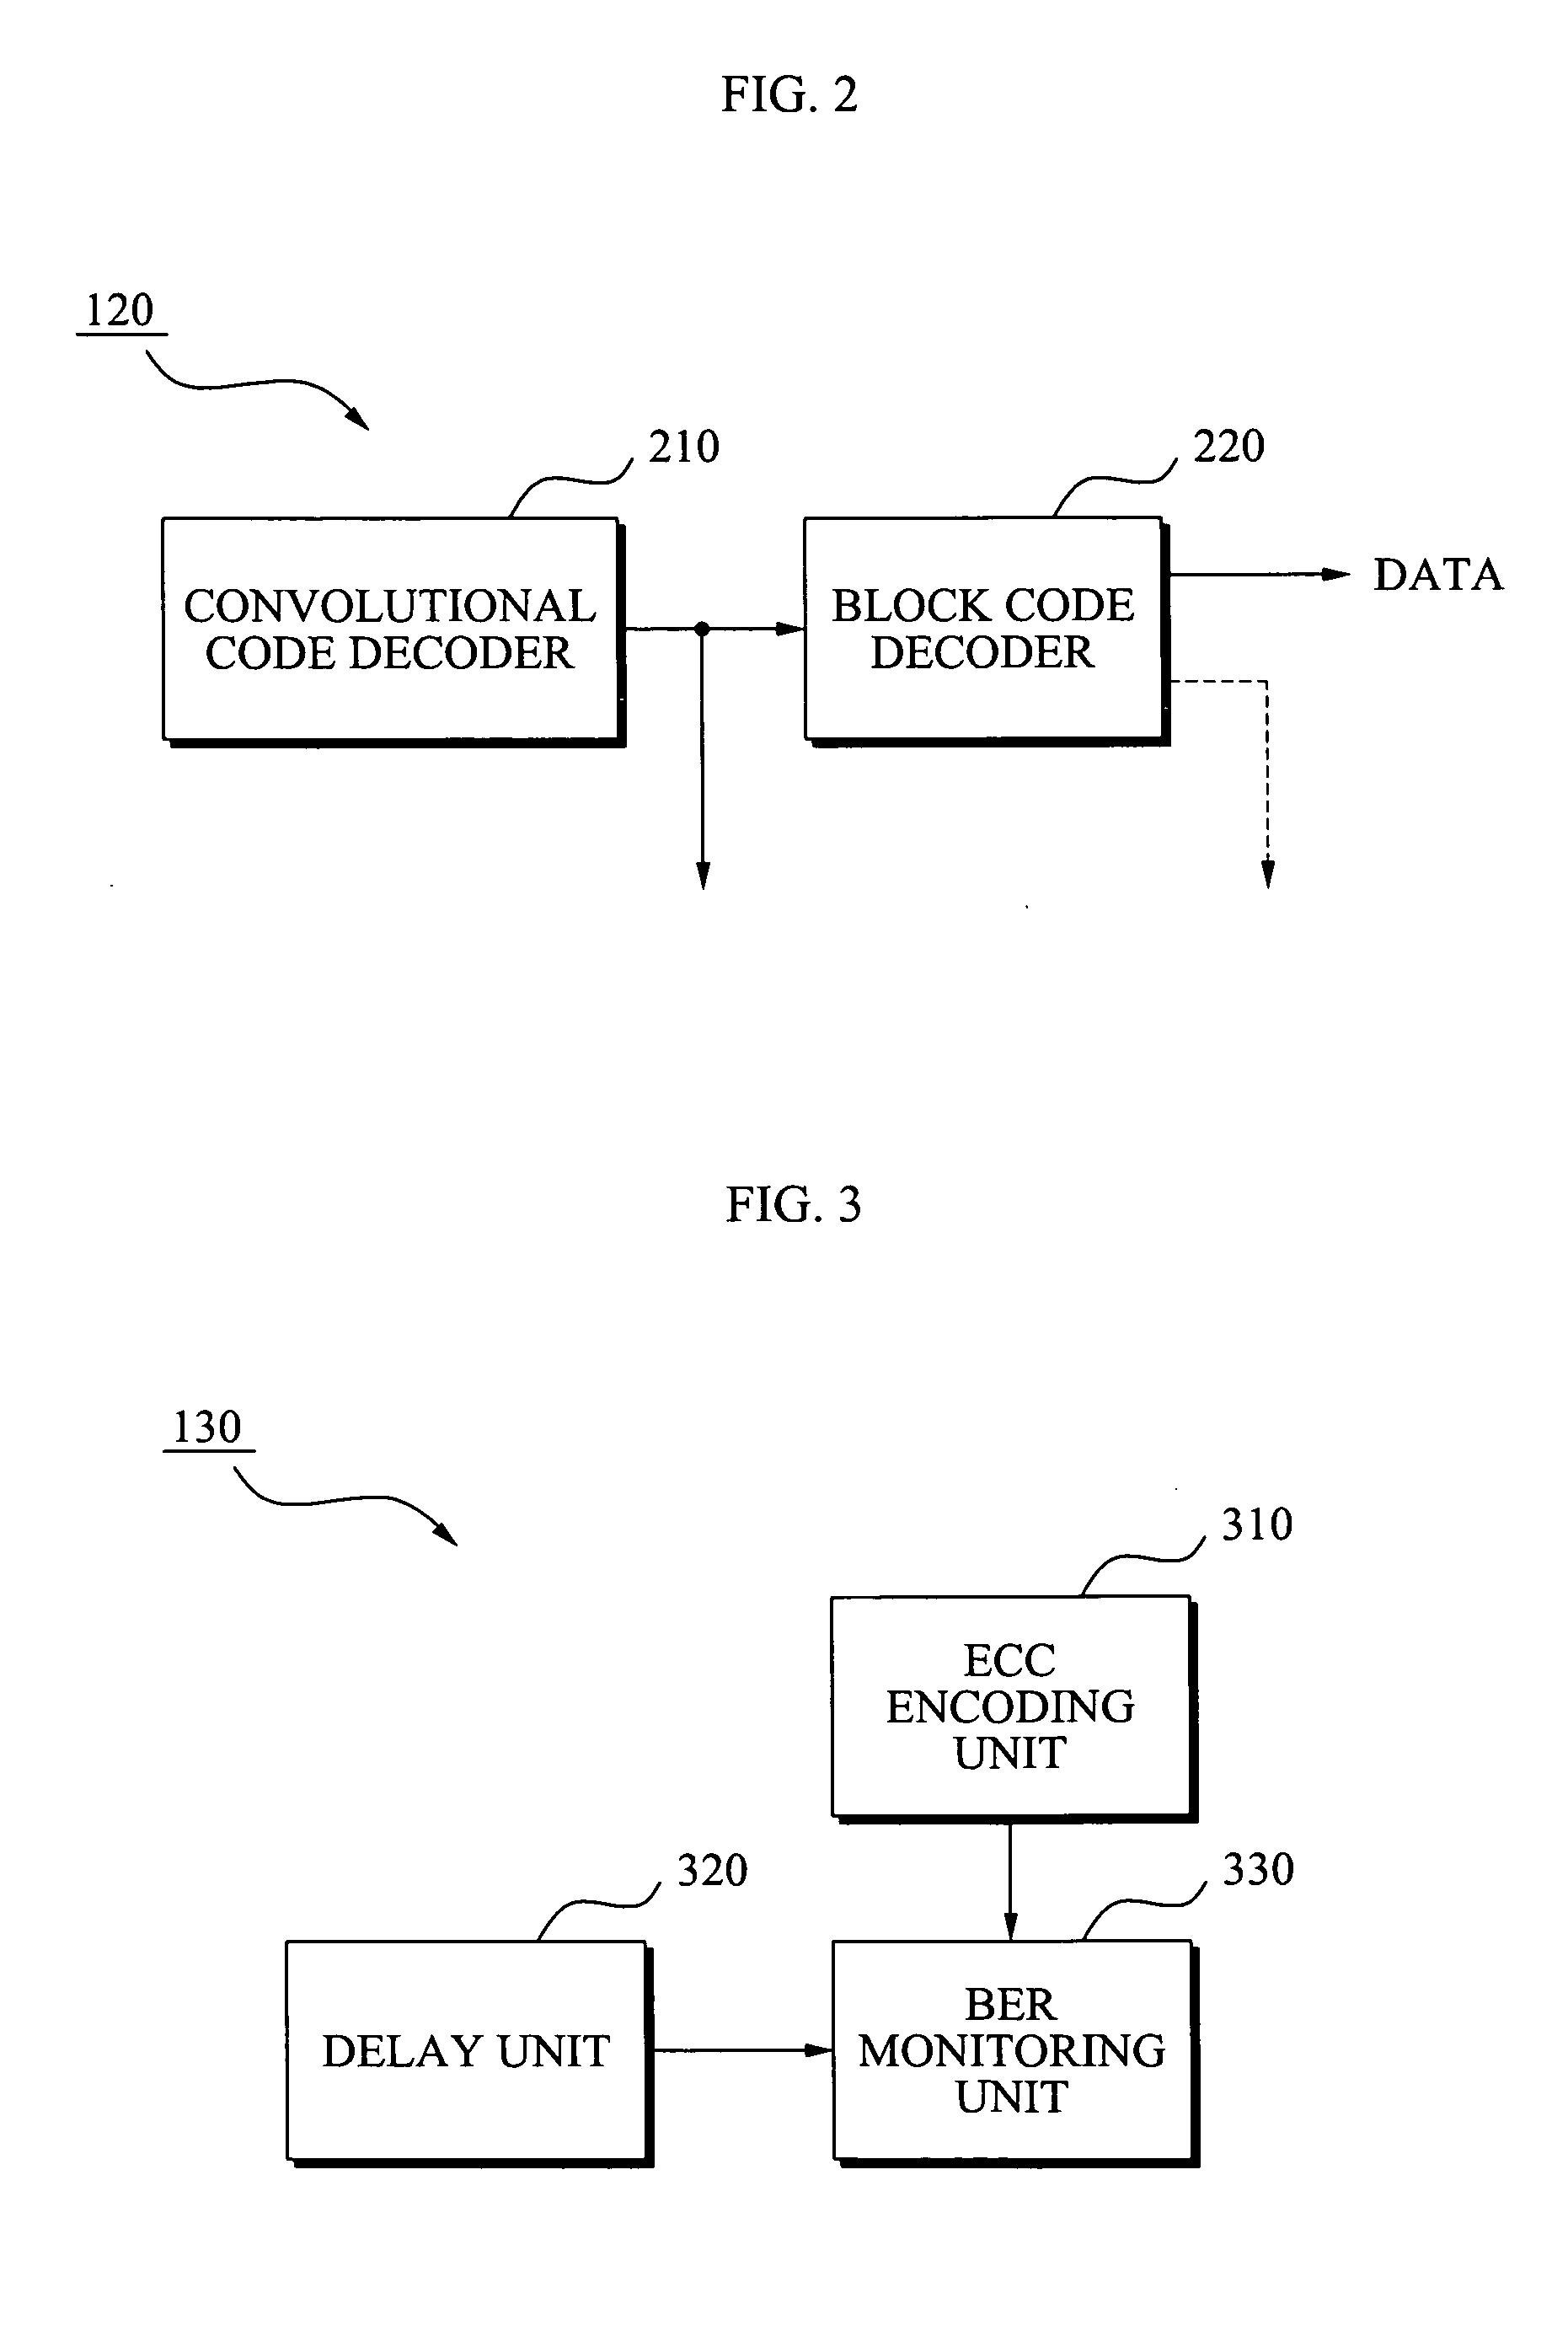 Read level control apparatuses and methods